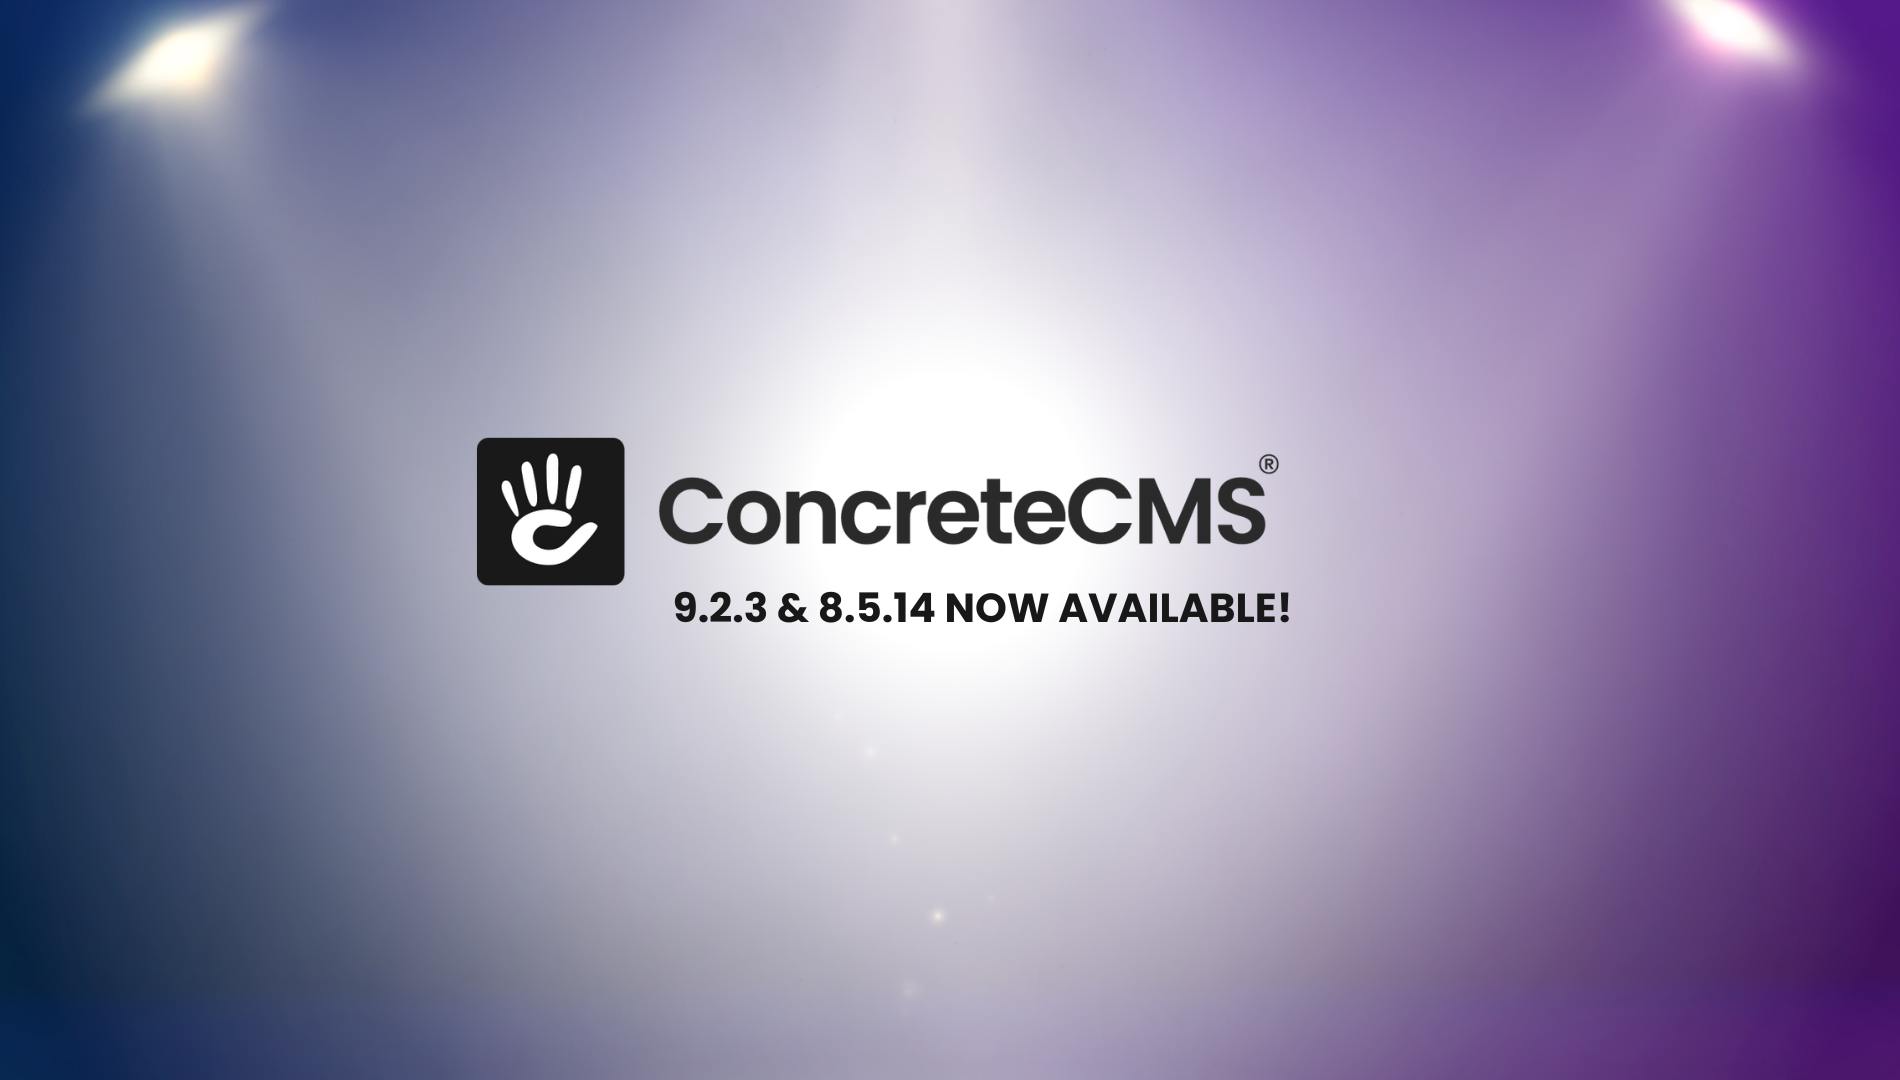 Weekly Round Up: Concrete CMS 9.2.3 & 8.5.14 Release and Insights from Digital.gov and Crazyegg